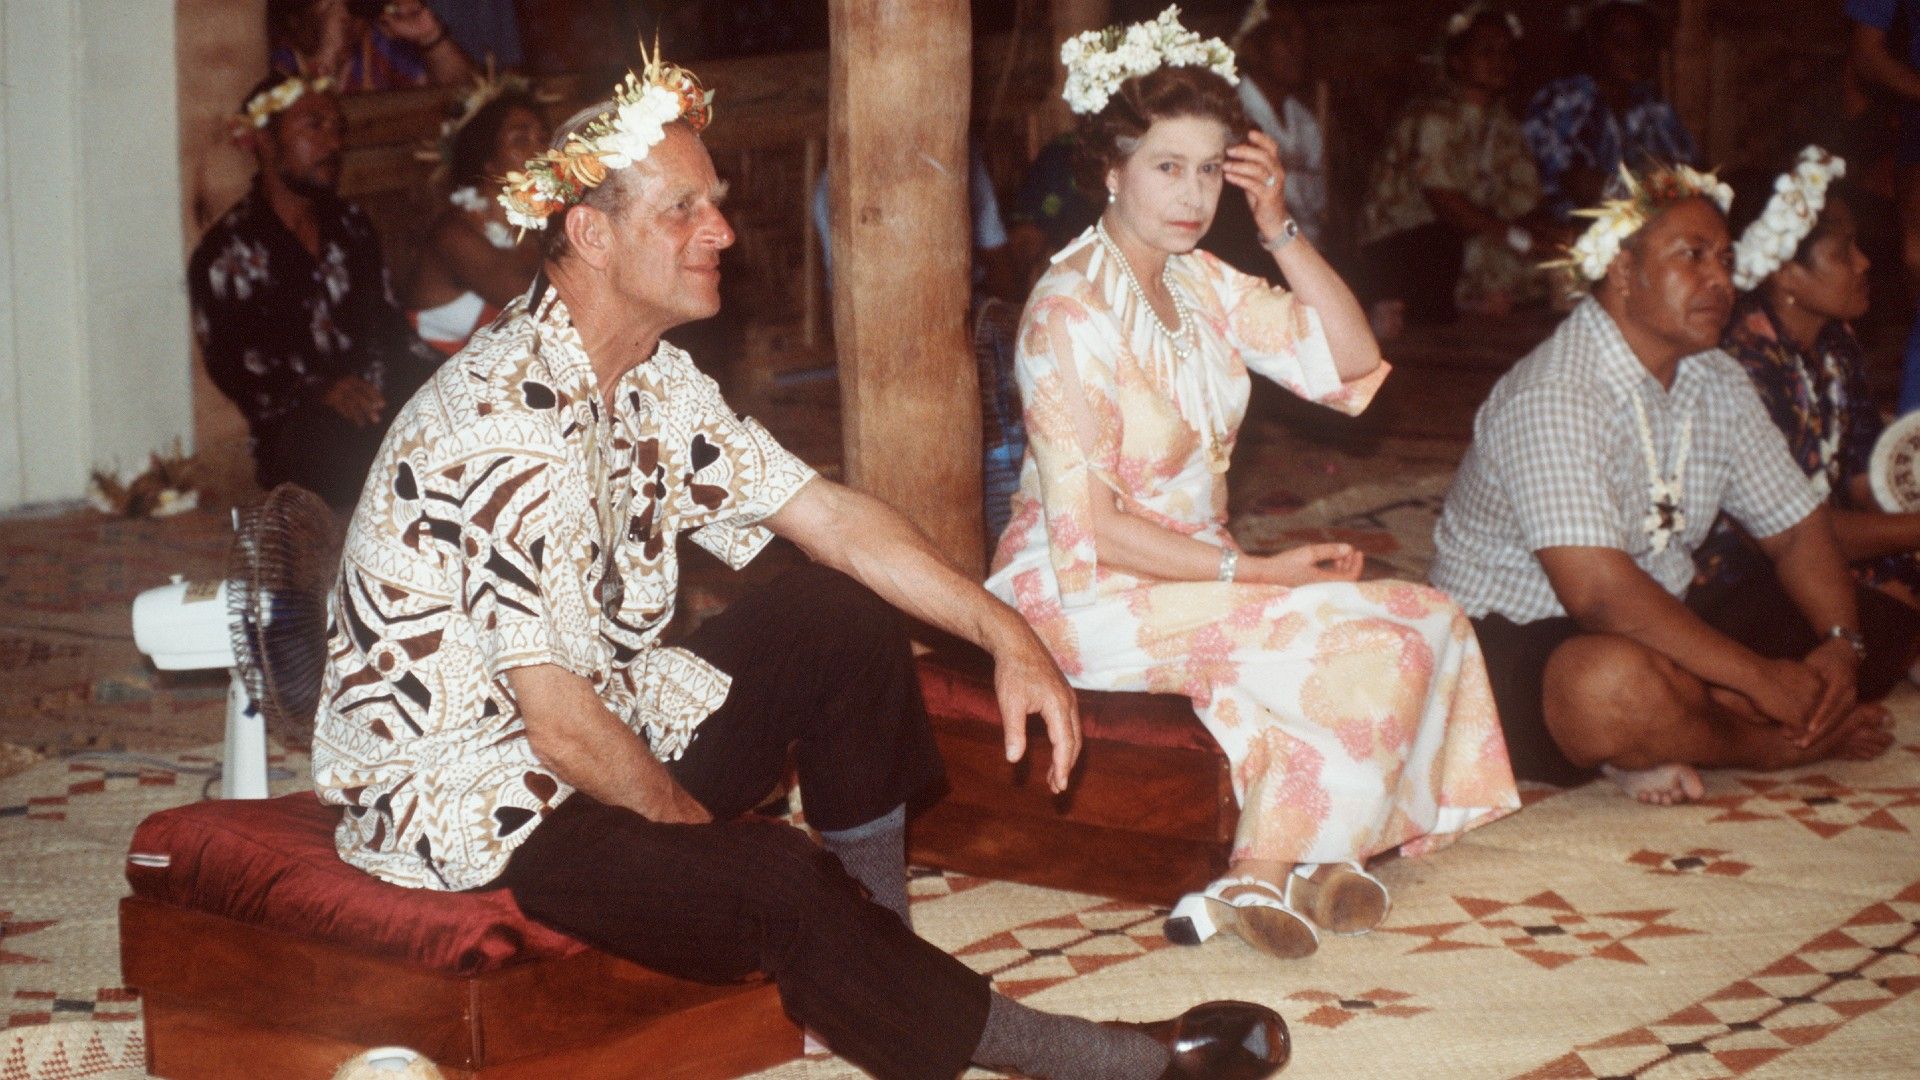 <p>                     In 1982, the Queen and her husband paid a visit to the island country of Tuvalu, in the South Pacific – the country formerly known as the Ellice Islands.                   </p>                                      <p>                     The couple spent two days in Tuvalu, during which they enjoyed a feast of traditional local dishes at a banquet which saw them seated on the floor and wearing floral headpieces; a rather unusual sight for the usually very formal Queen and her husband.                   </p>                                      <p>                     During their trip, the royal couple also ceremonially installed a piece of concrete at a future Parliament building. To mark the visit, a range of commemorative stamps were issued by the Tuvalu Philatelic Bureau. Since that visit, both King Charles and the Prince and Princess of Wales have visited Tuvalu too.                   </p>